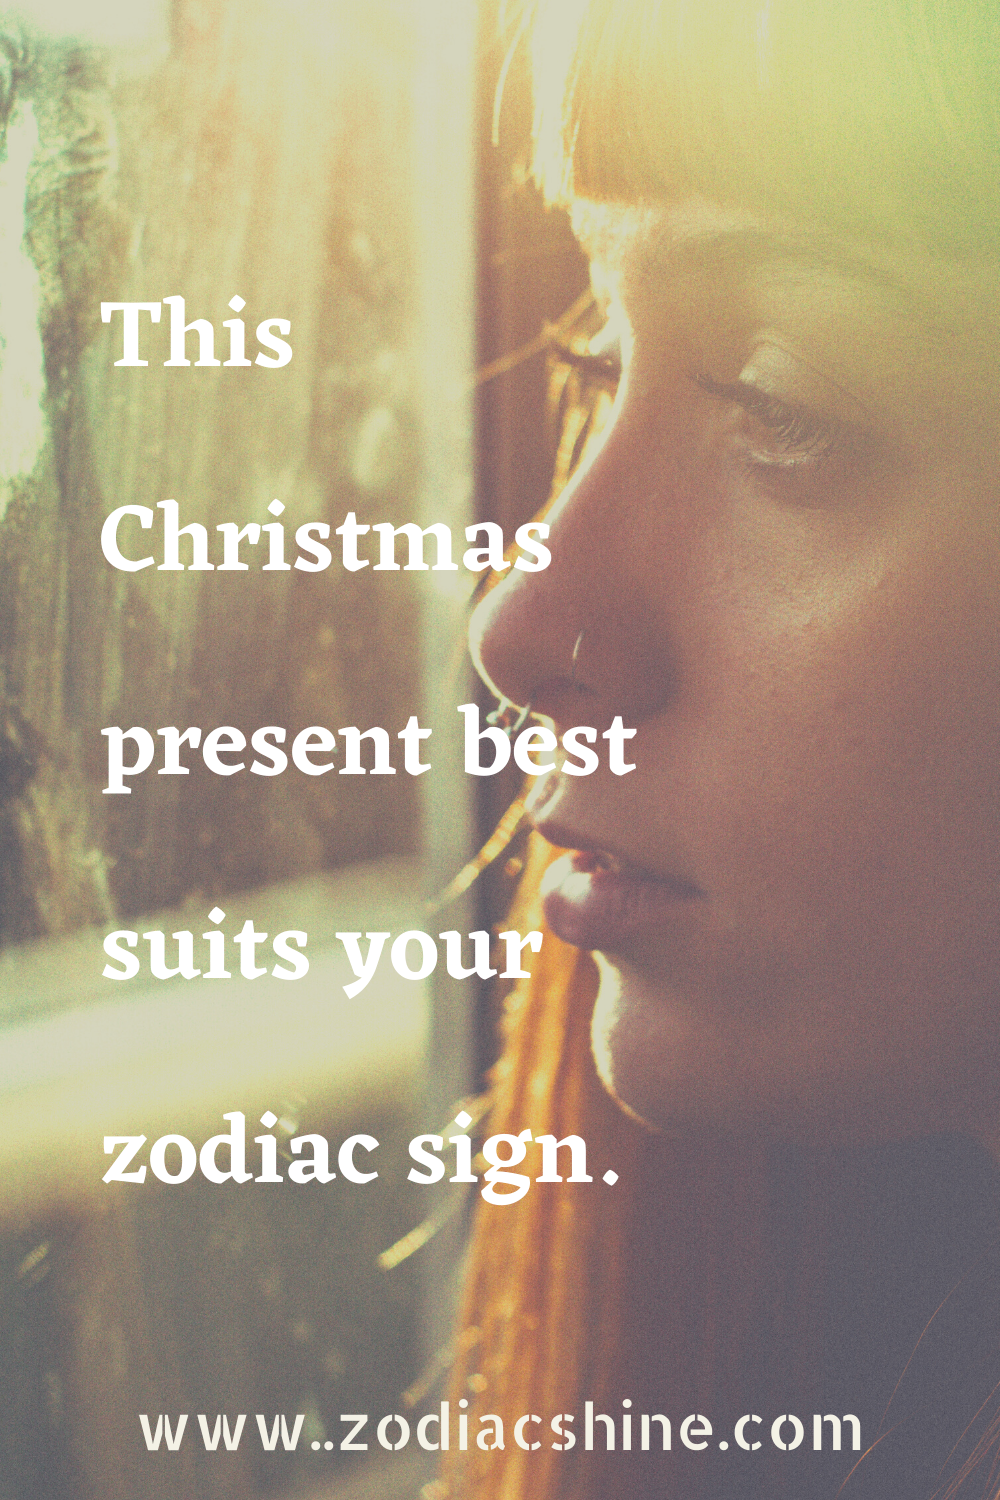 This Christmas present best suits your zodiac sign.